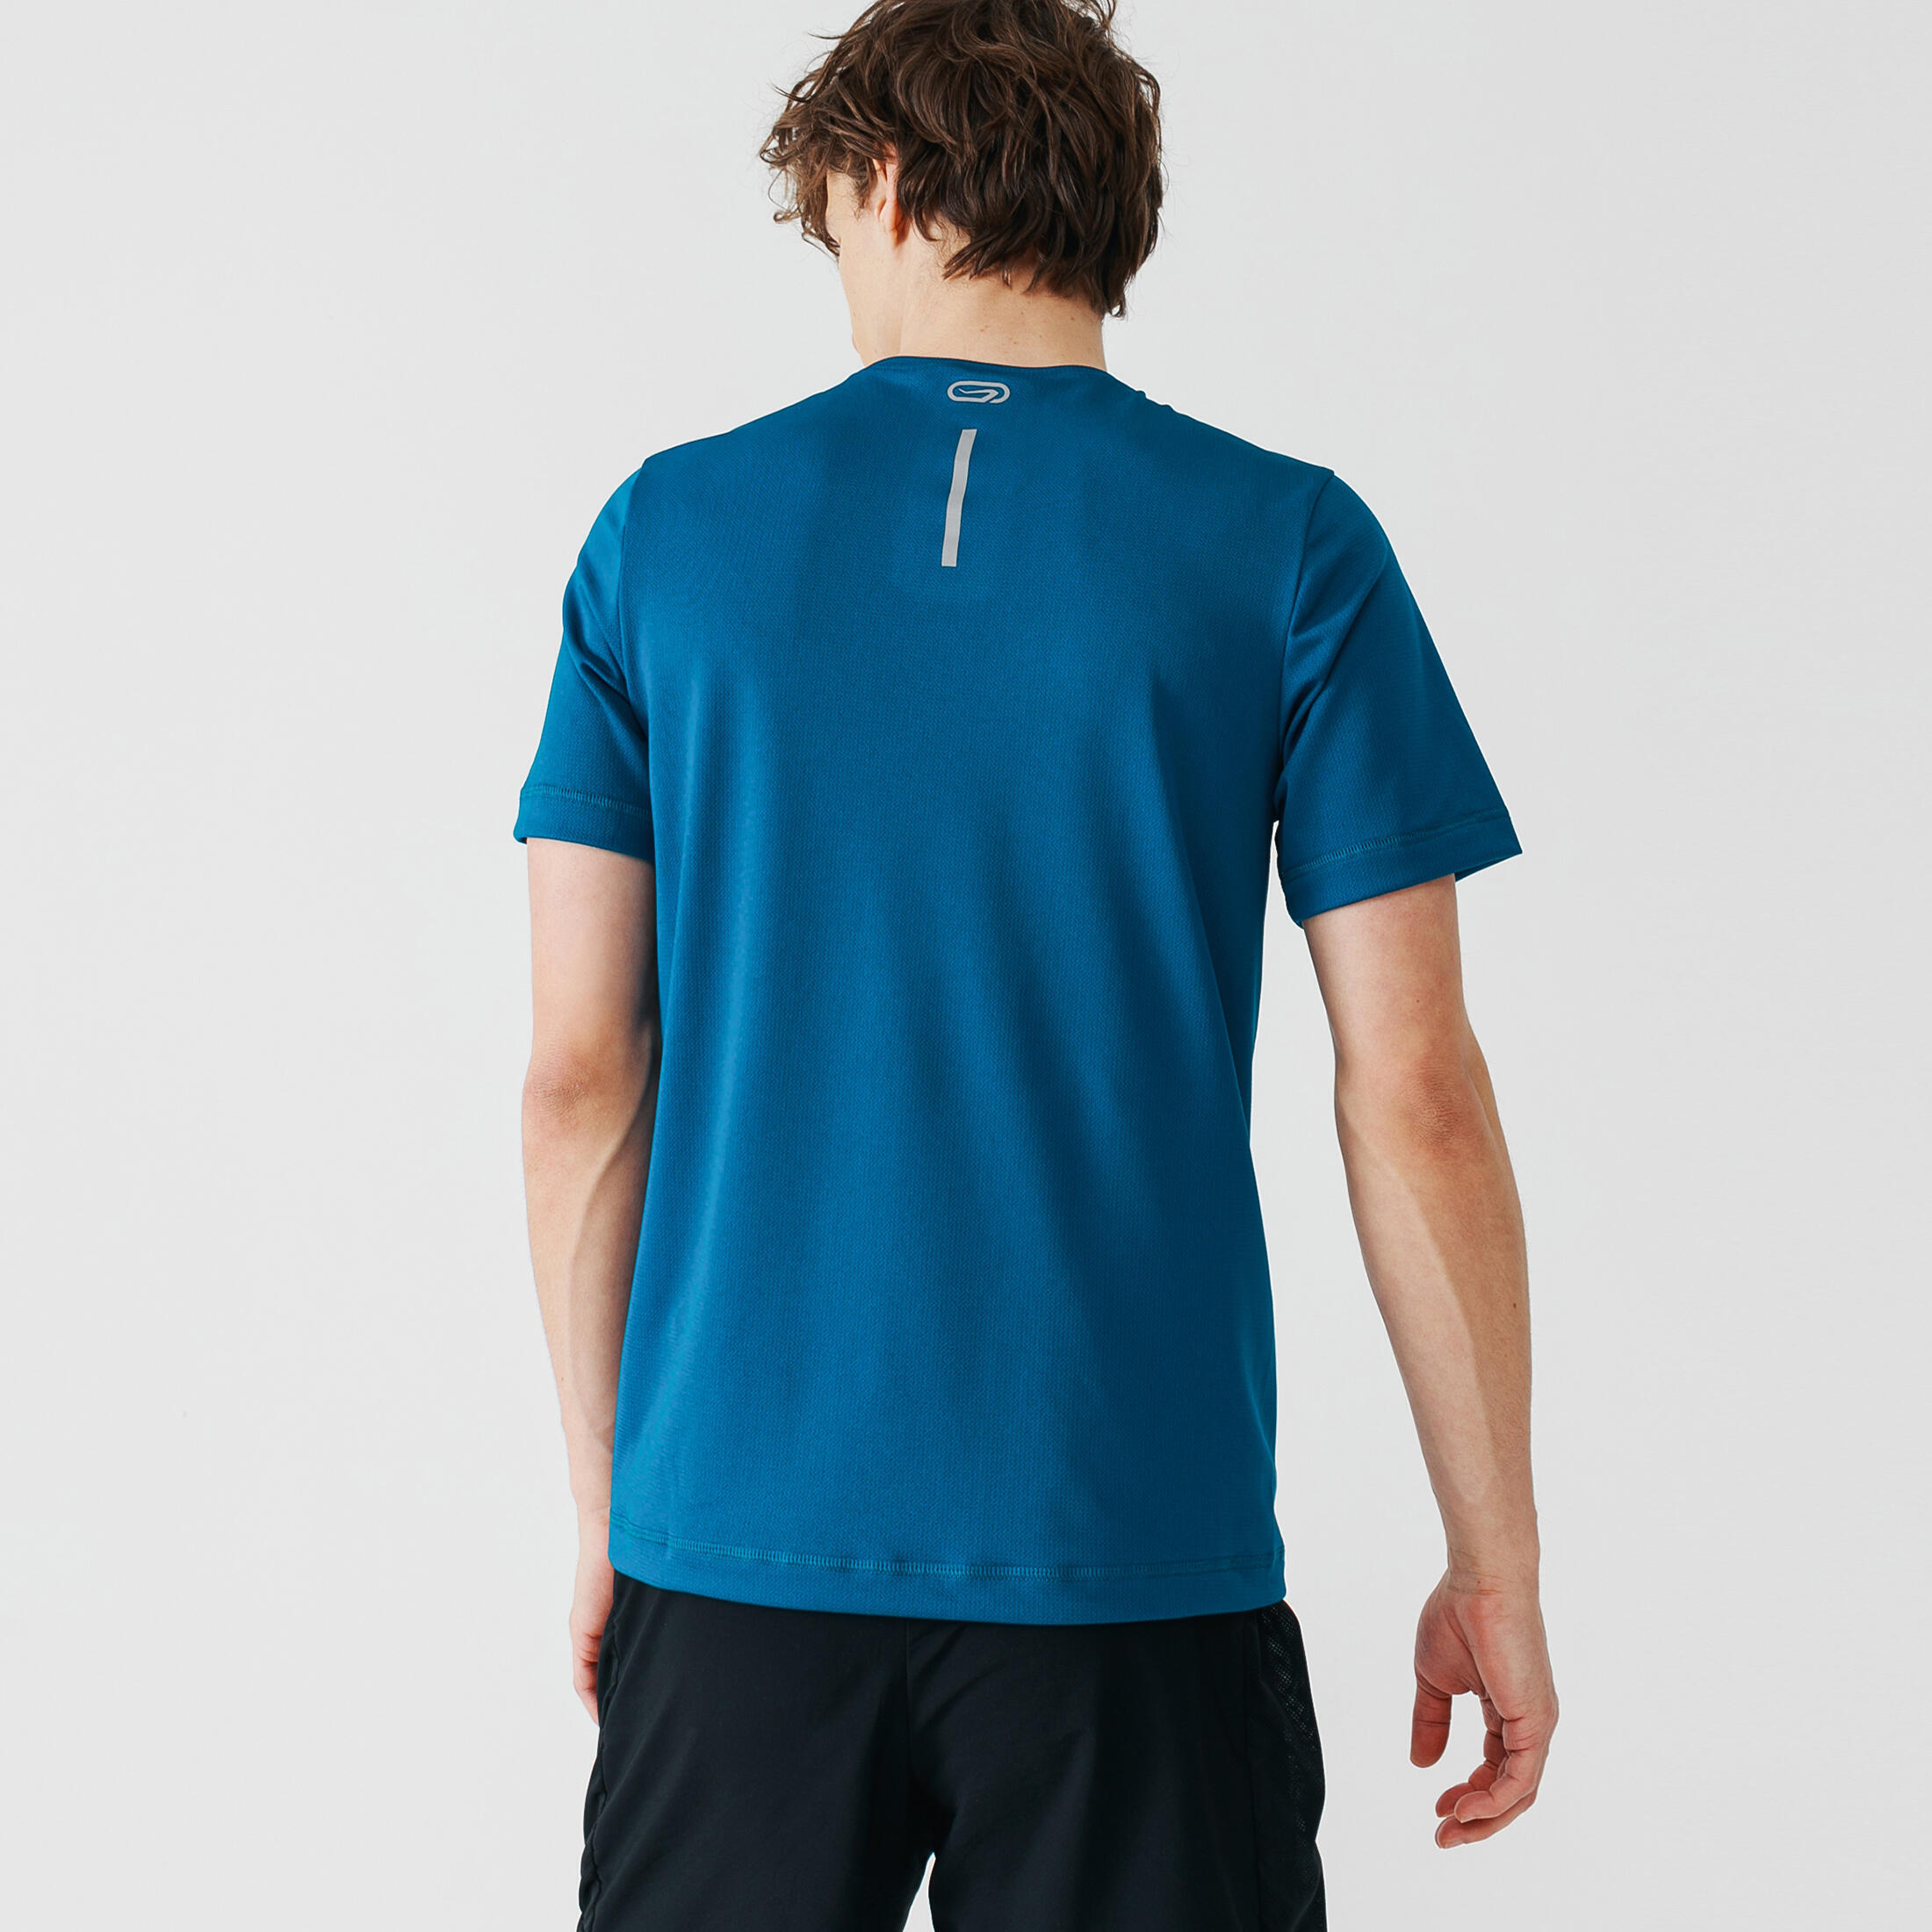 Dry Men's Running Breathable T-shirt - Prussian Blue 2/5